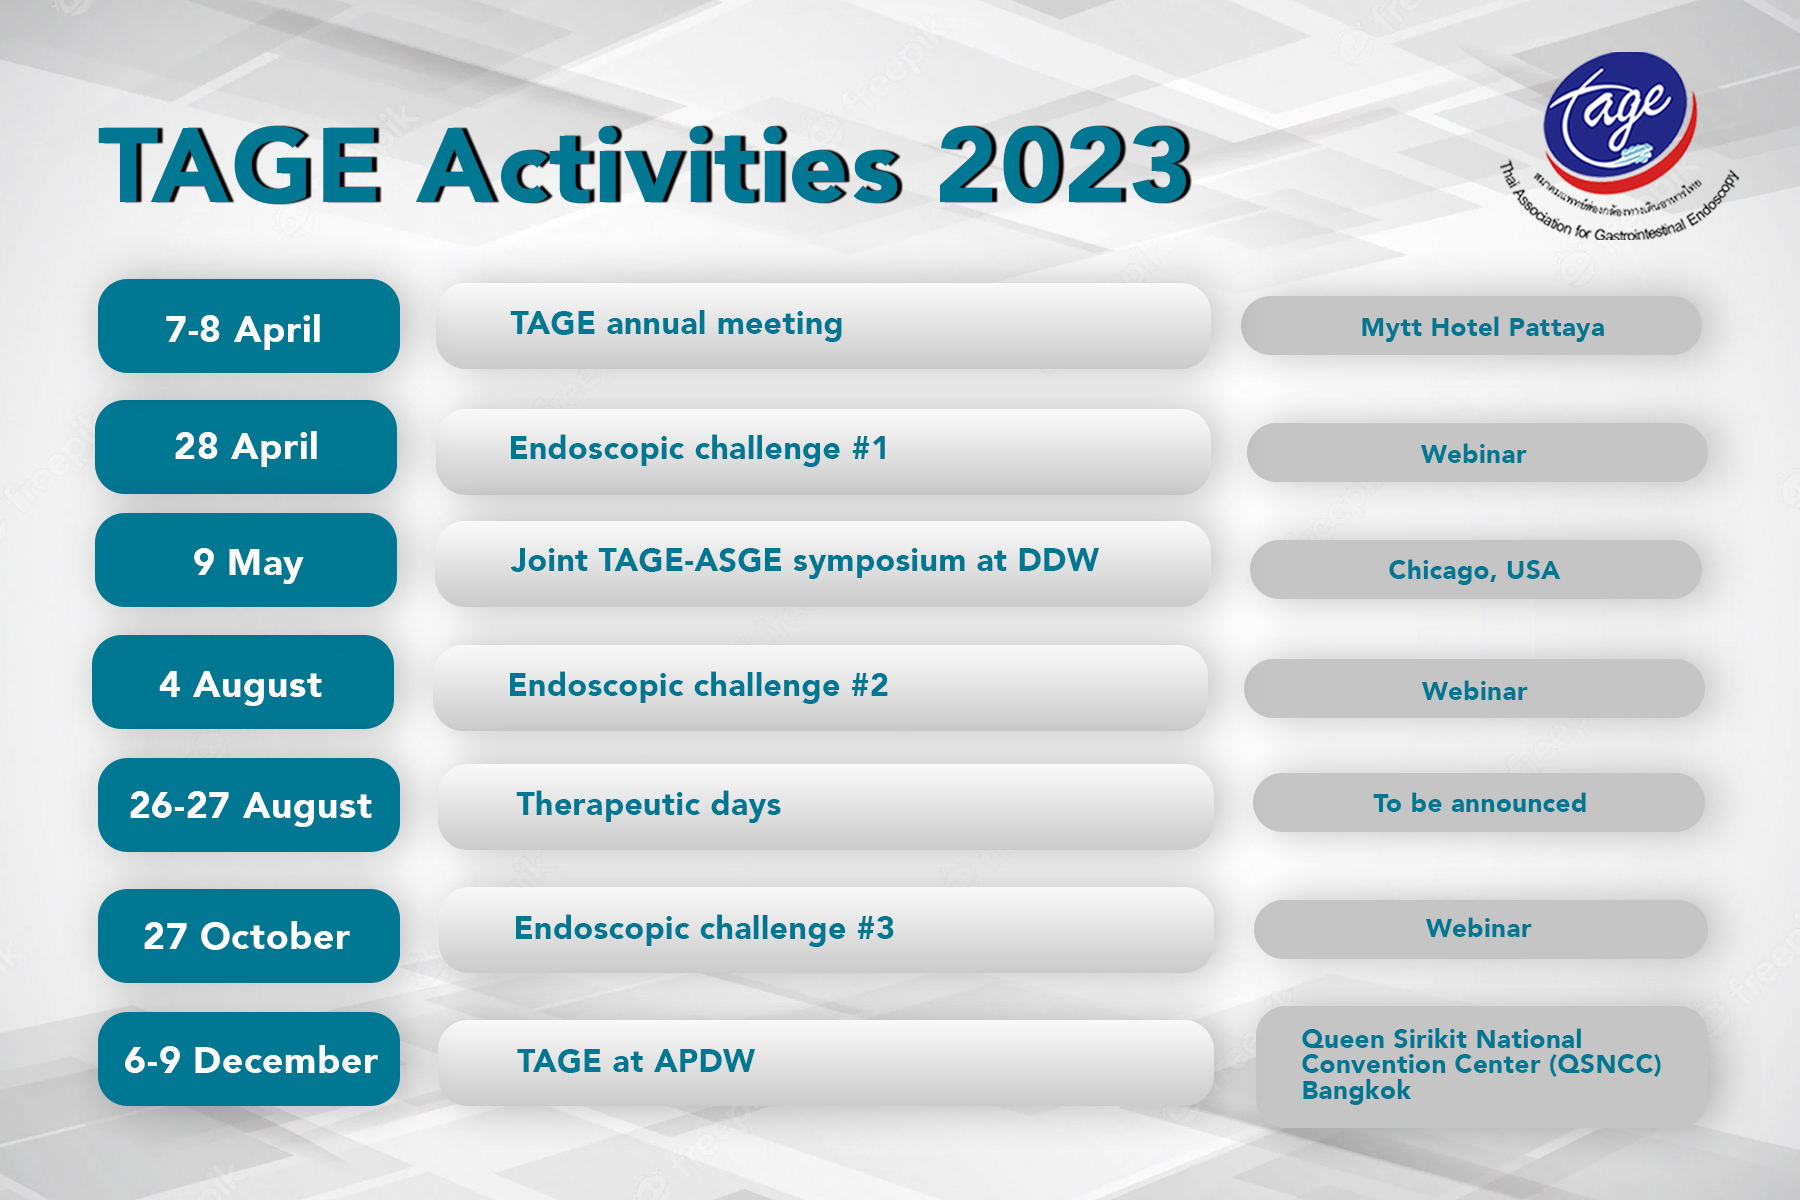 TAGE ACTIVITIES 2023